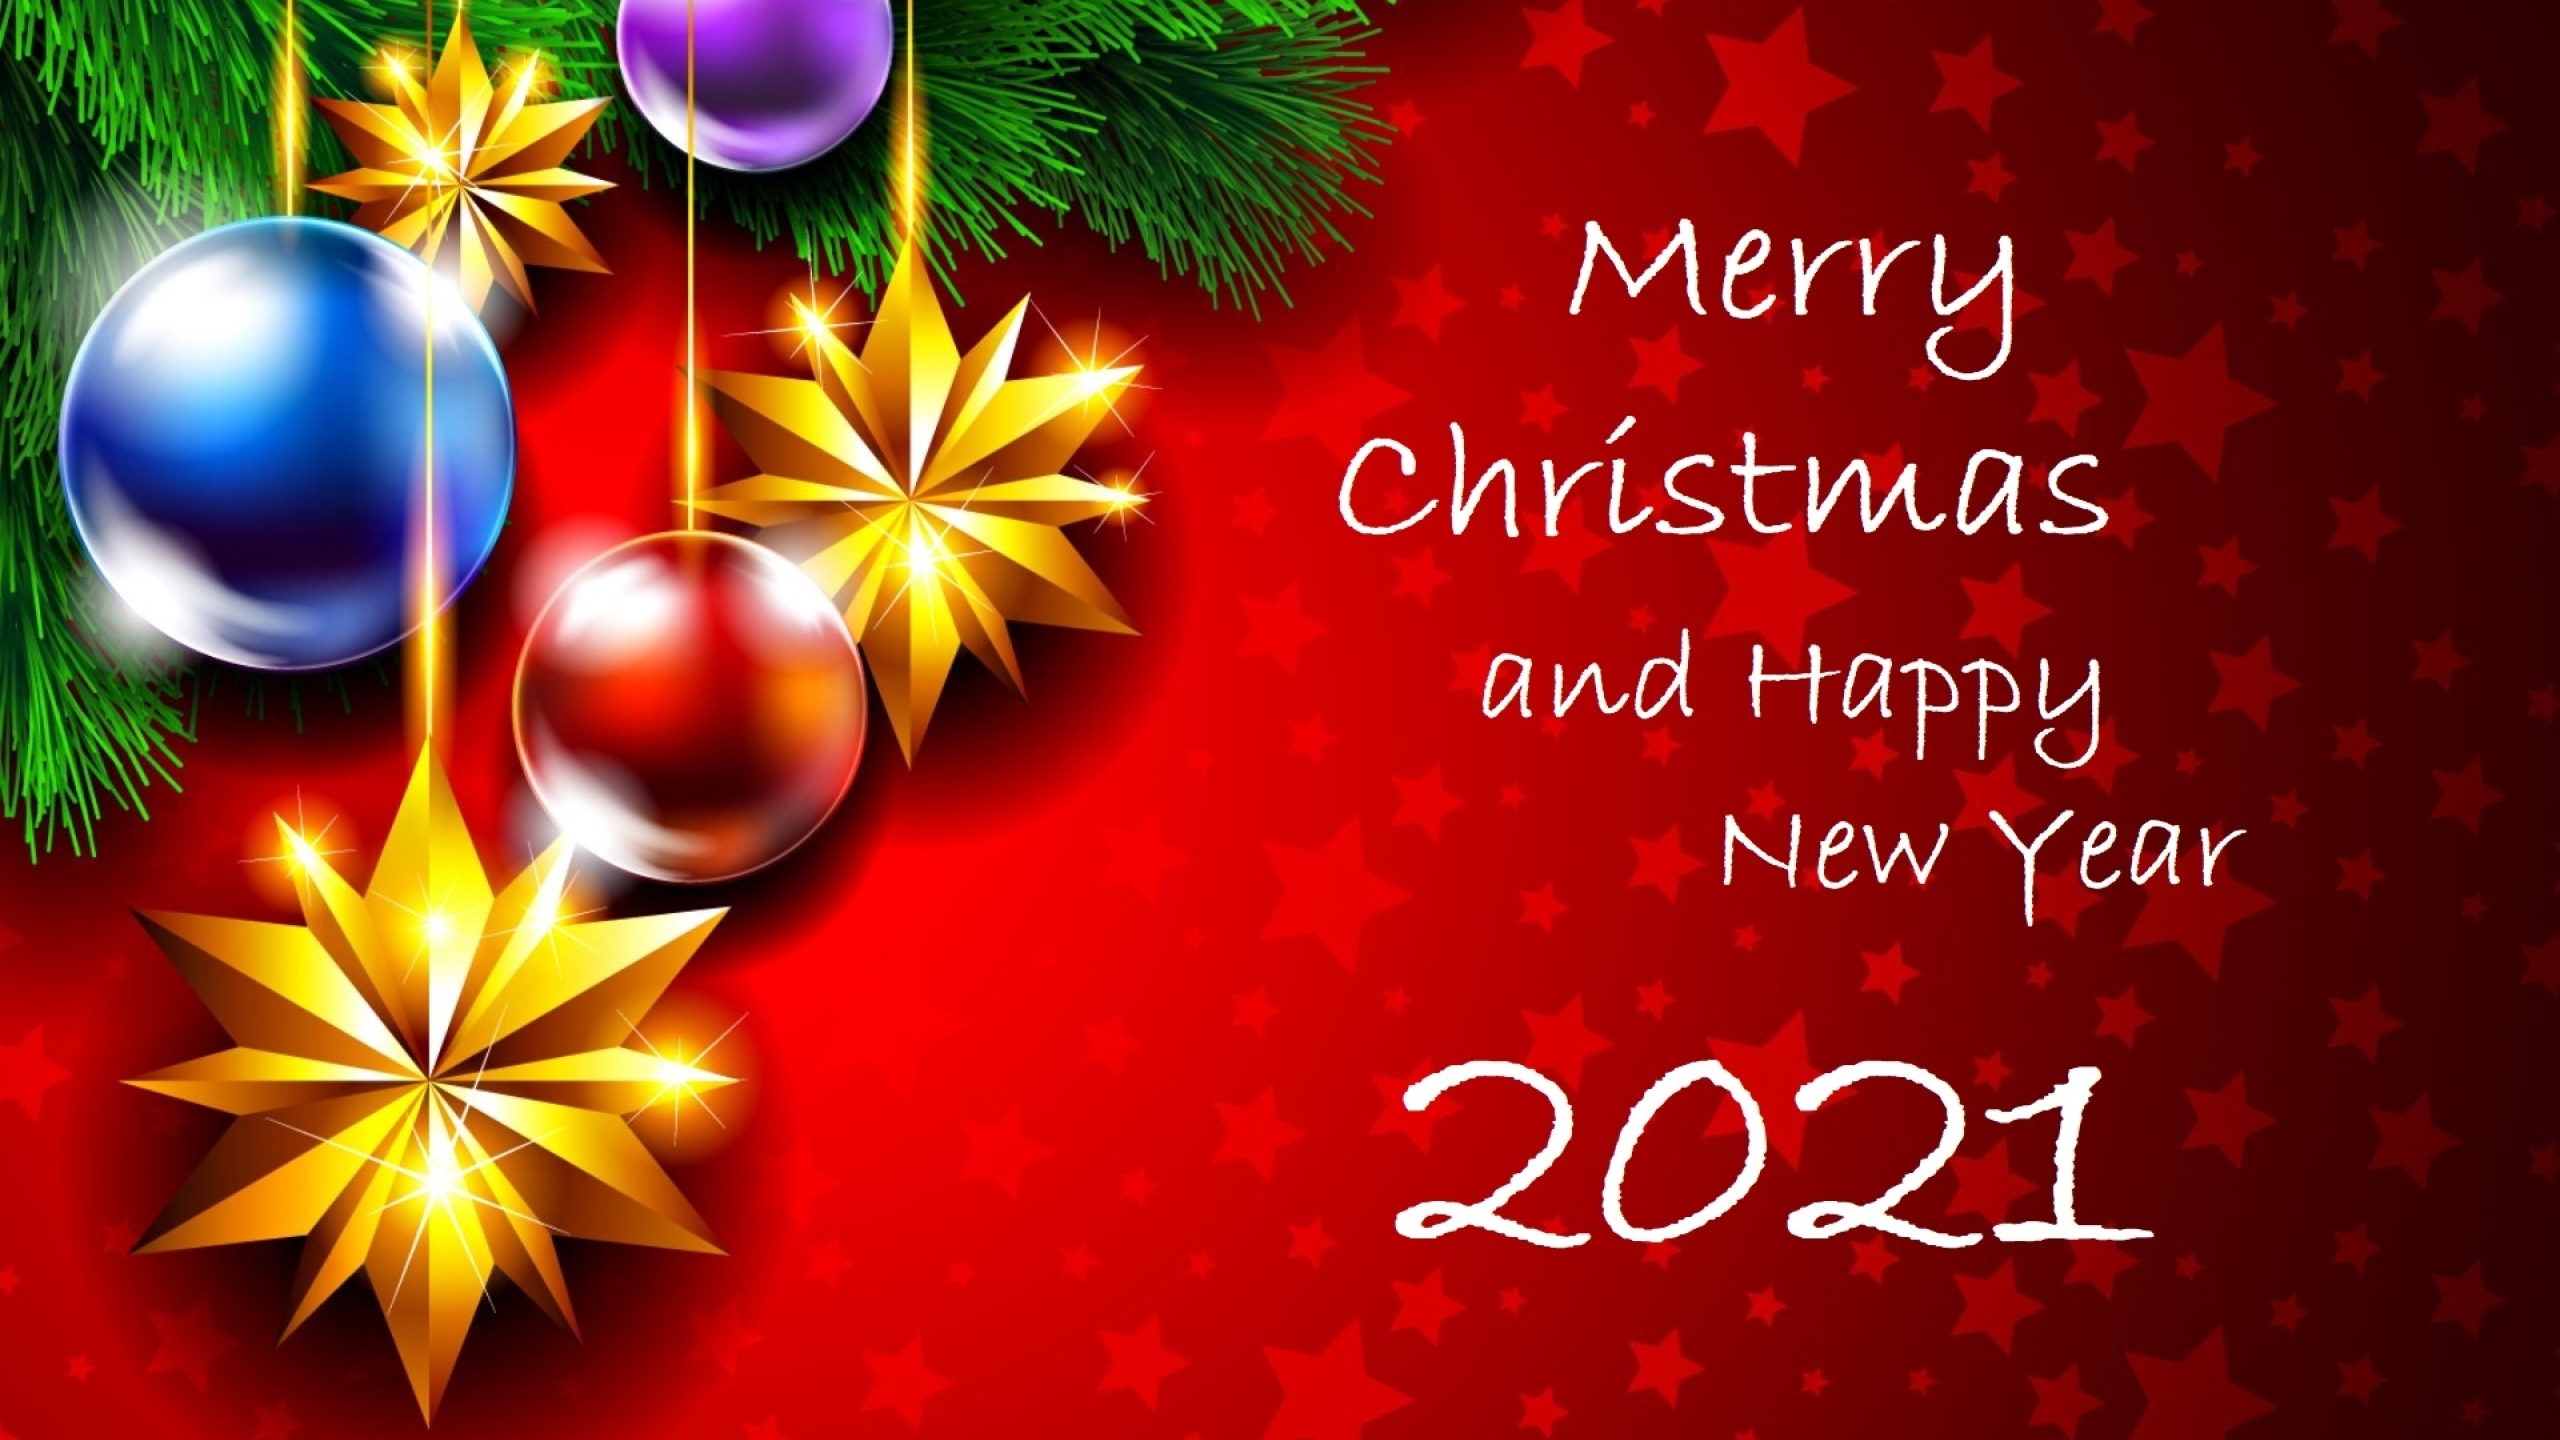 2560x1440 Happy New Year Merry Christmas 2021 Greeting 1440P Resolution